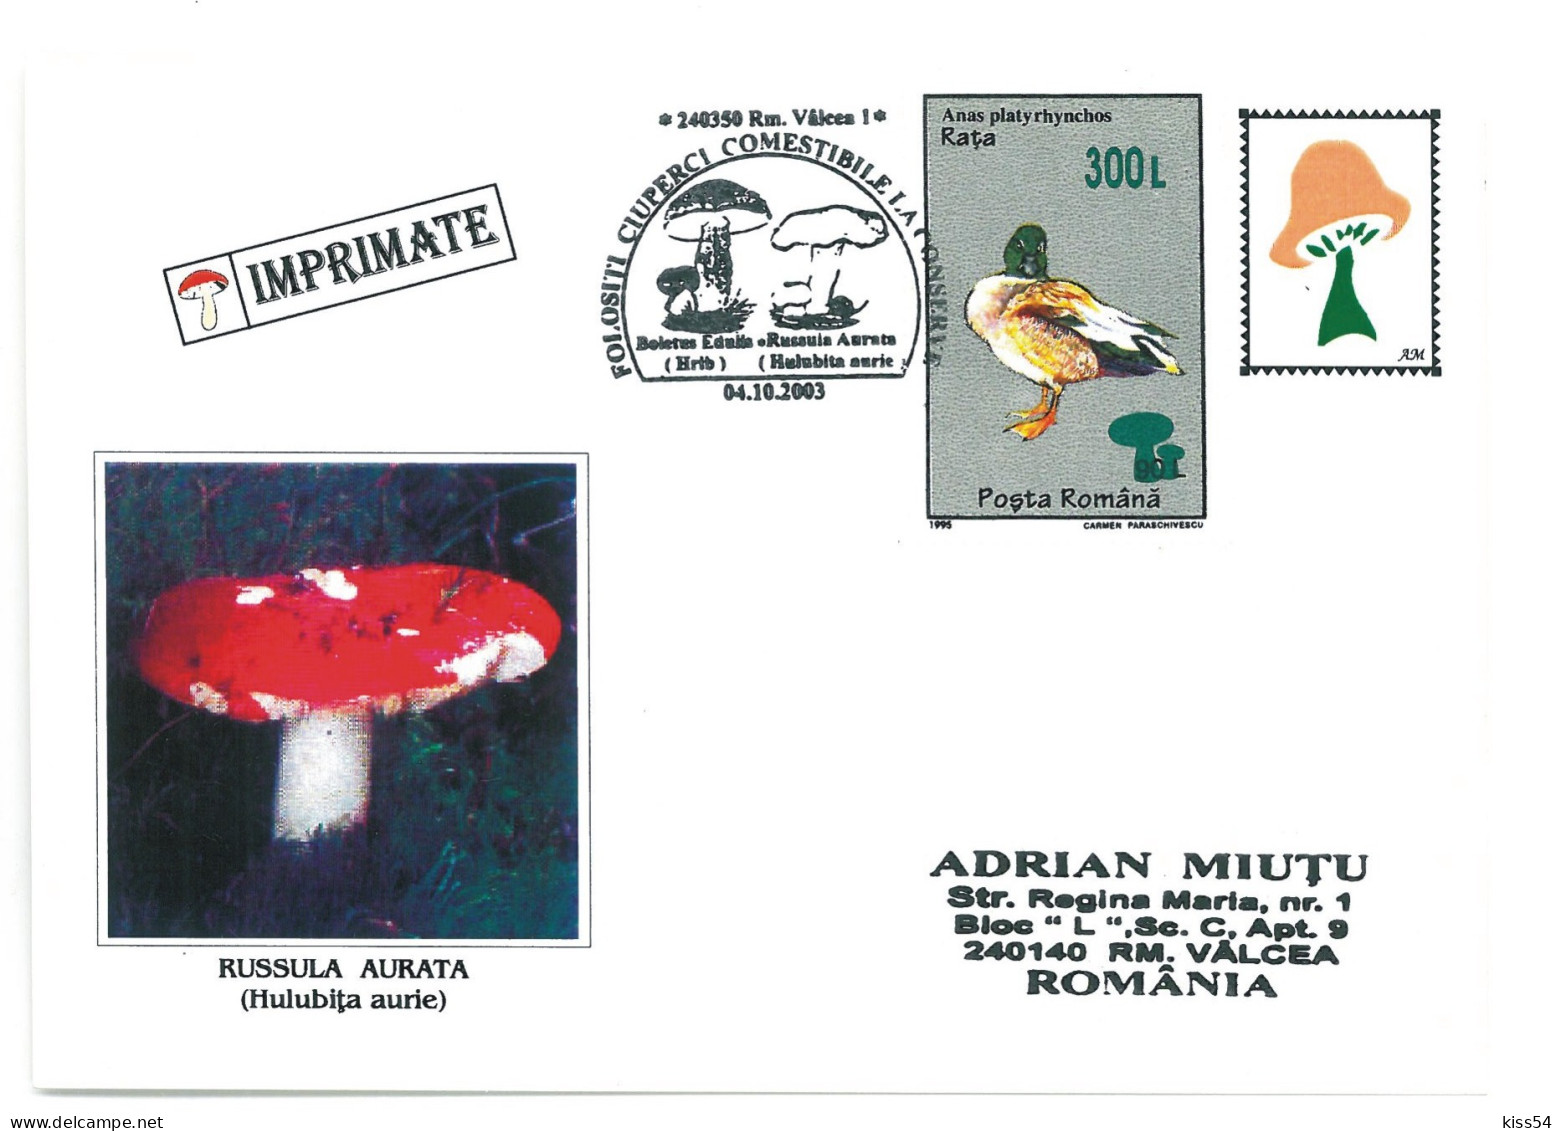 COV 997 - 3171 MUSHROOMS, Romania - Cover - Used - 2003 - Covers & Documents